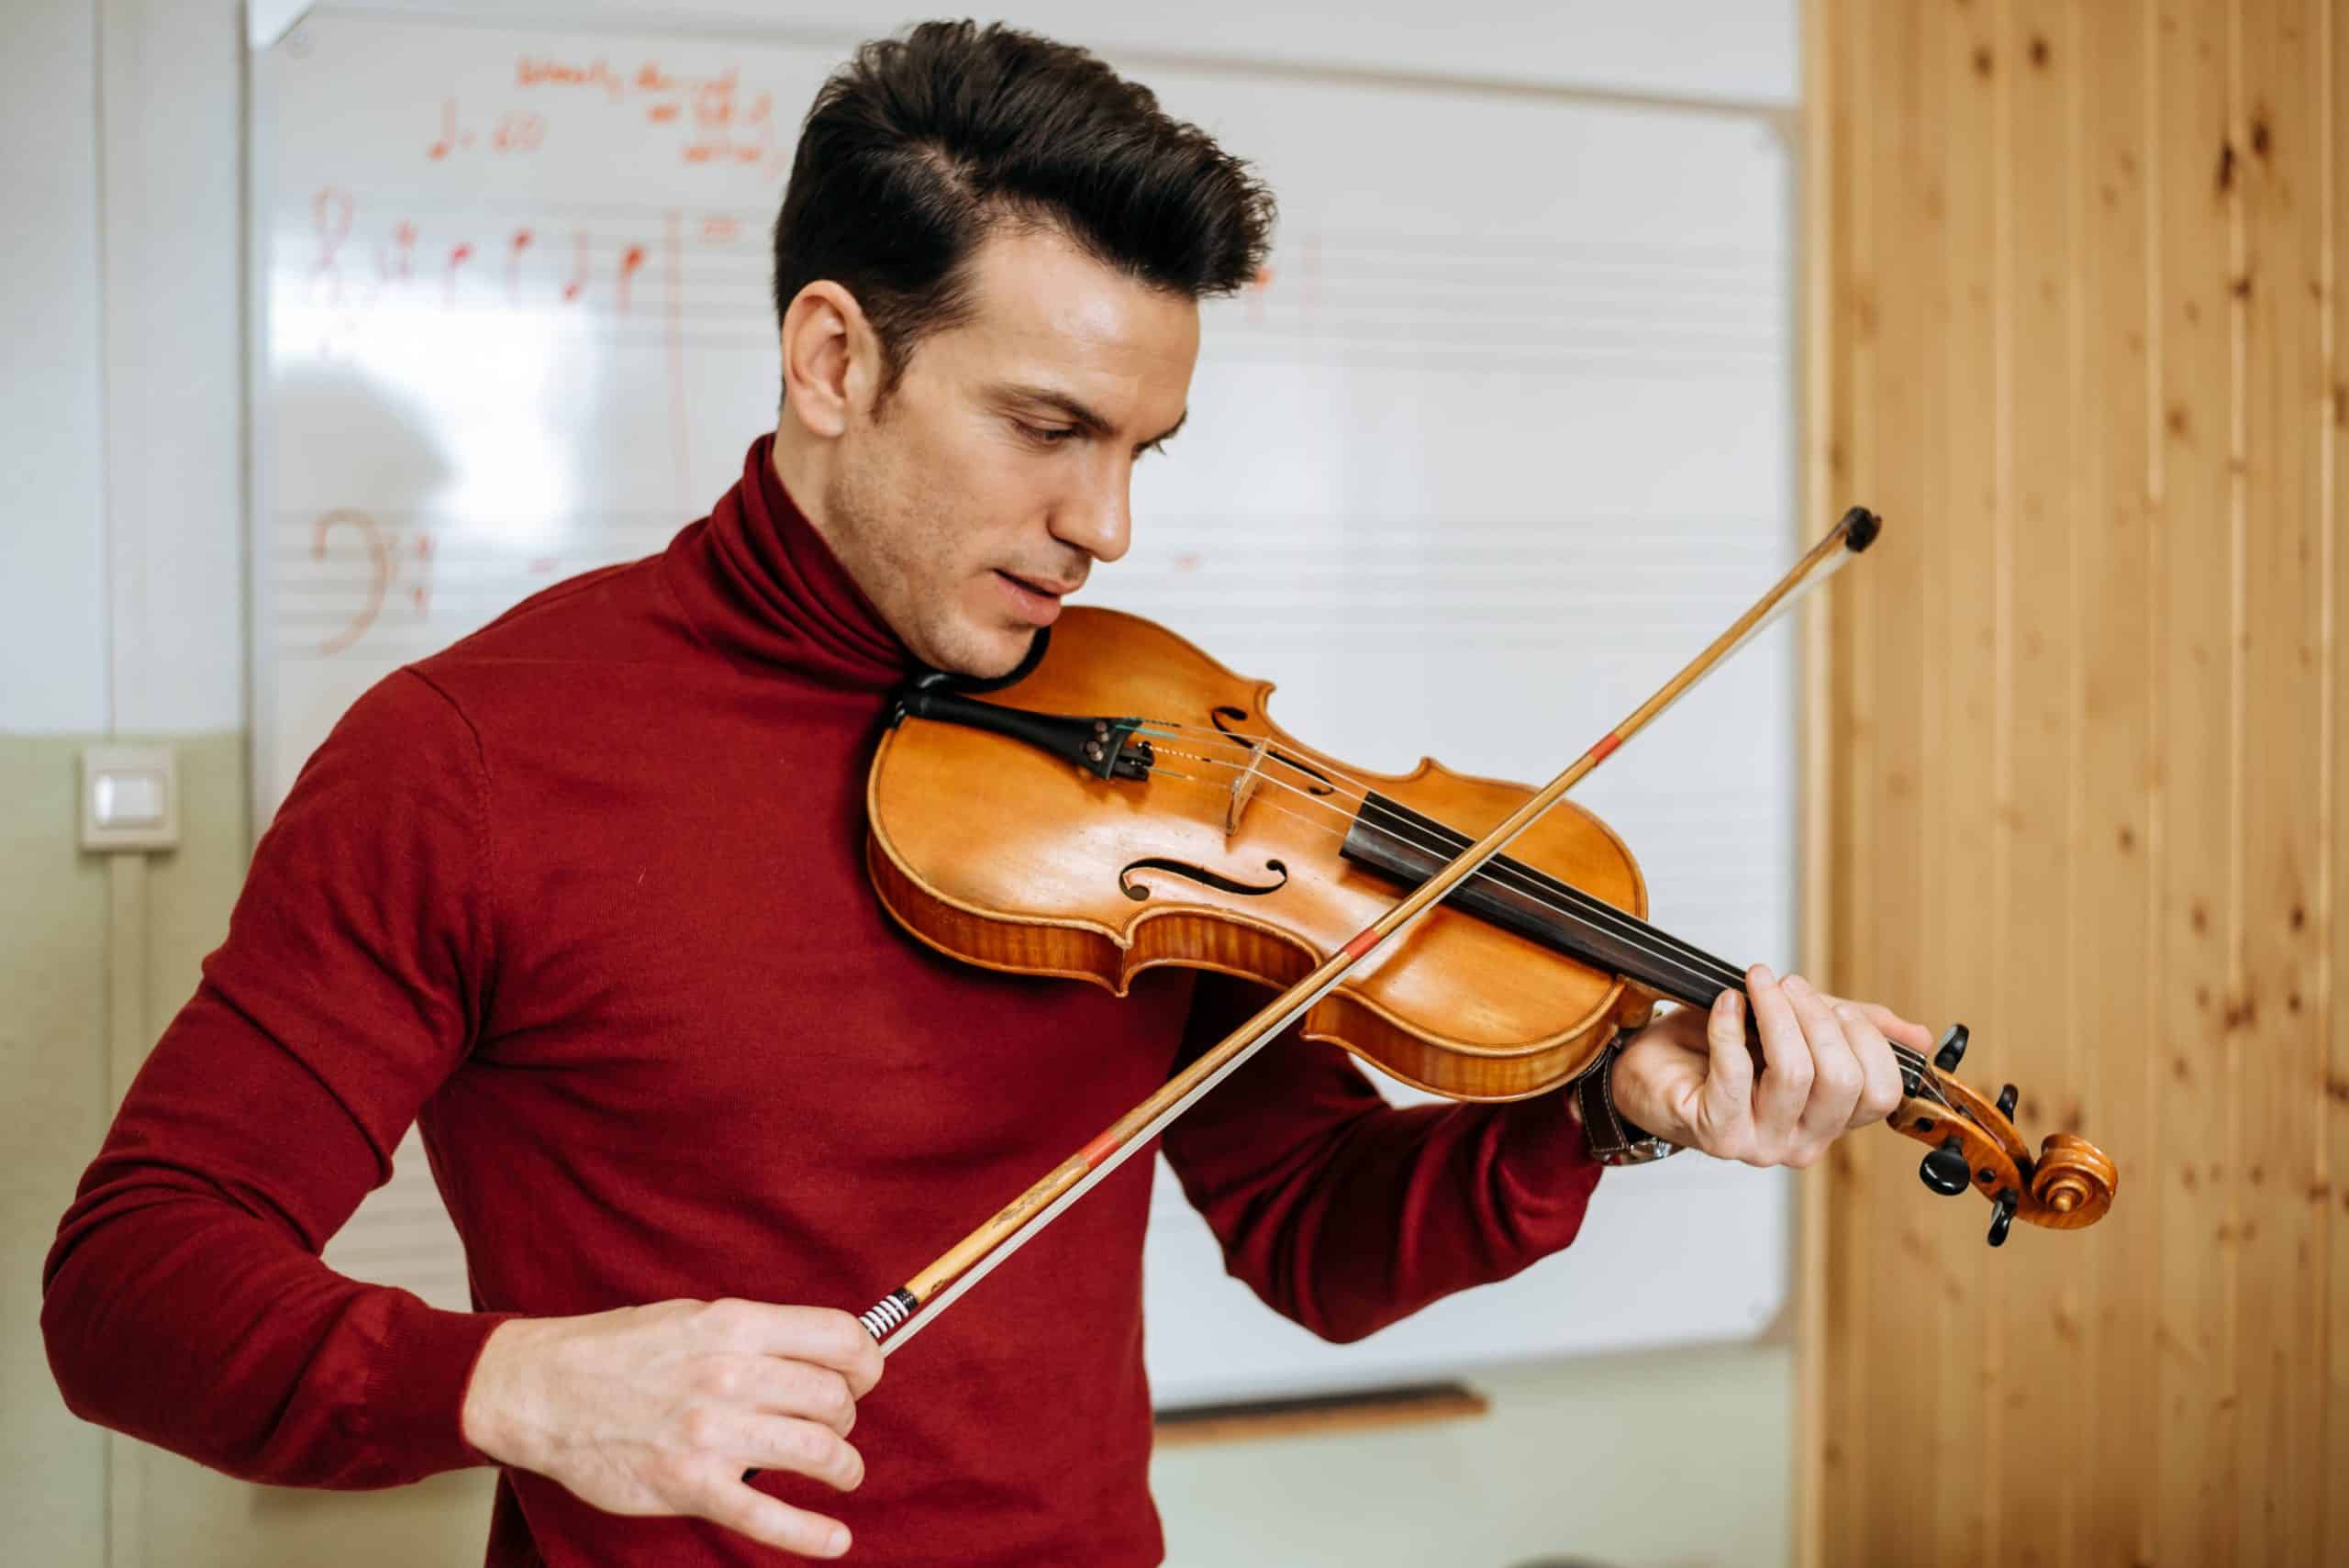 Tips to learn the violin for beginners